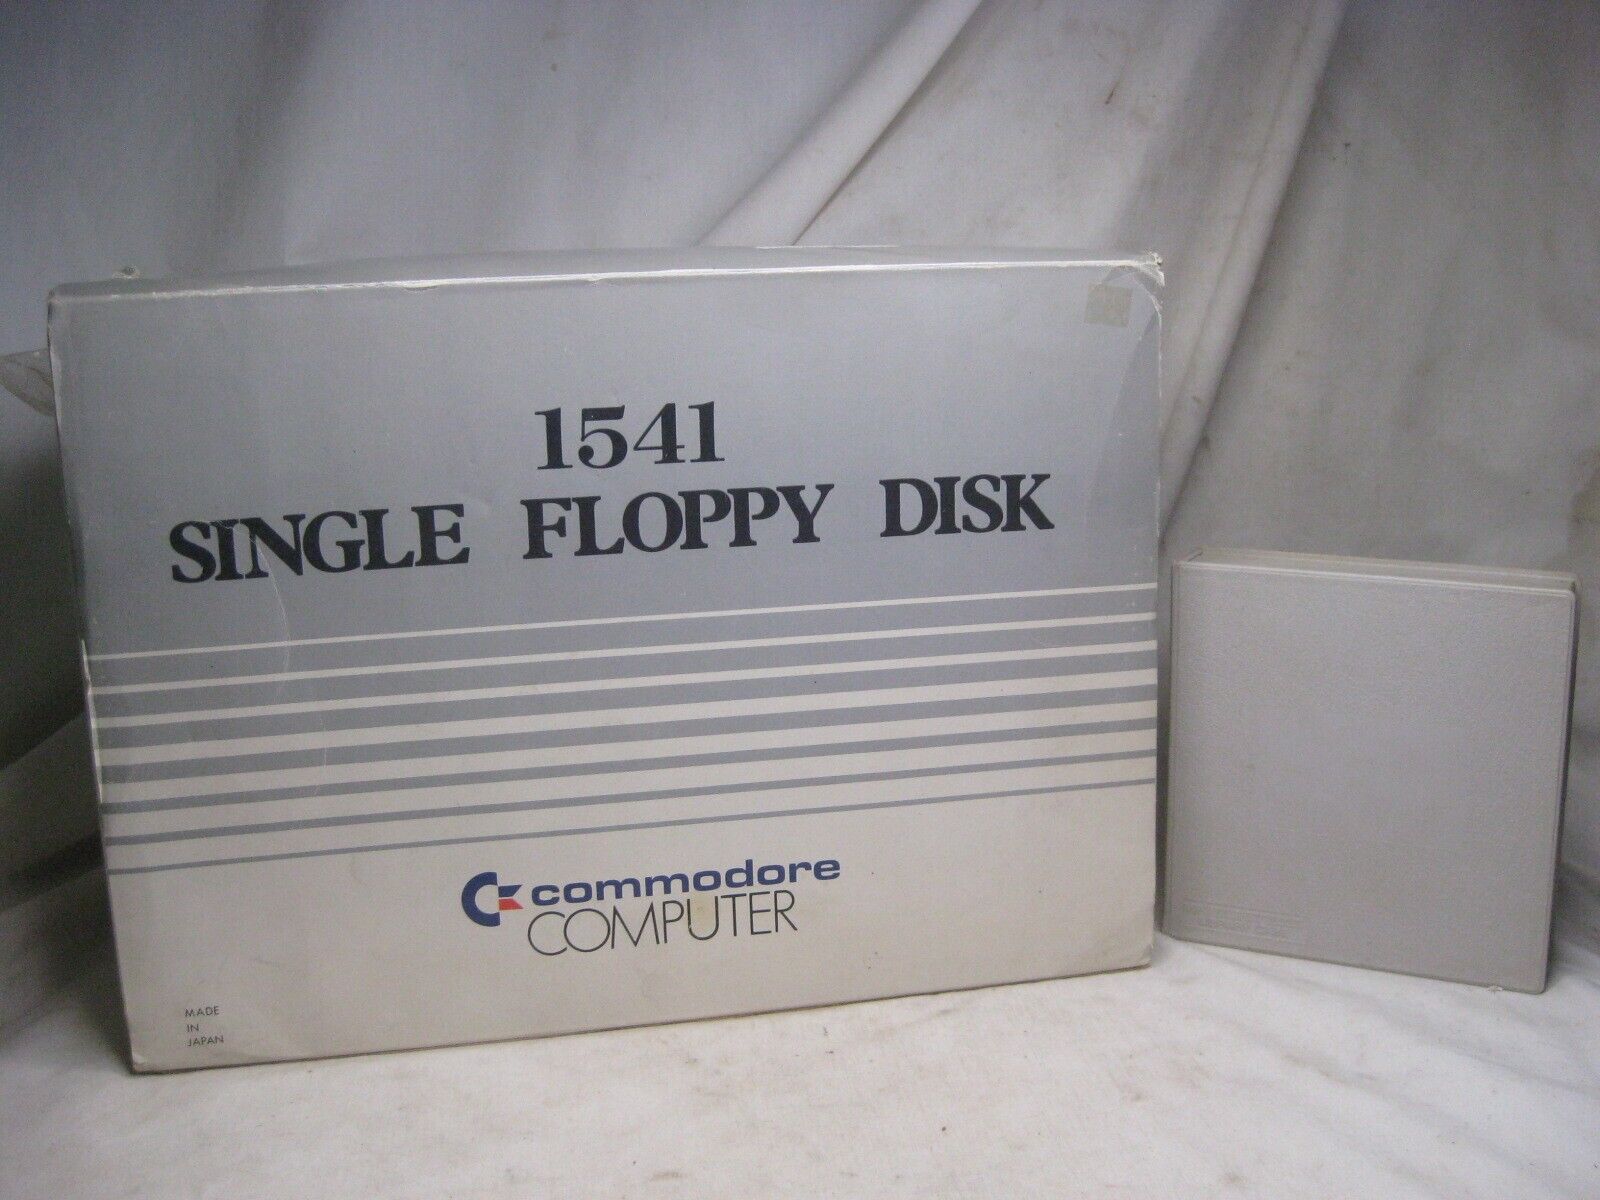 vintage Commodore Computer 1541 SINGLE FLOPPY DISK Japan mfg. w/ box & software